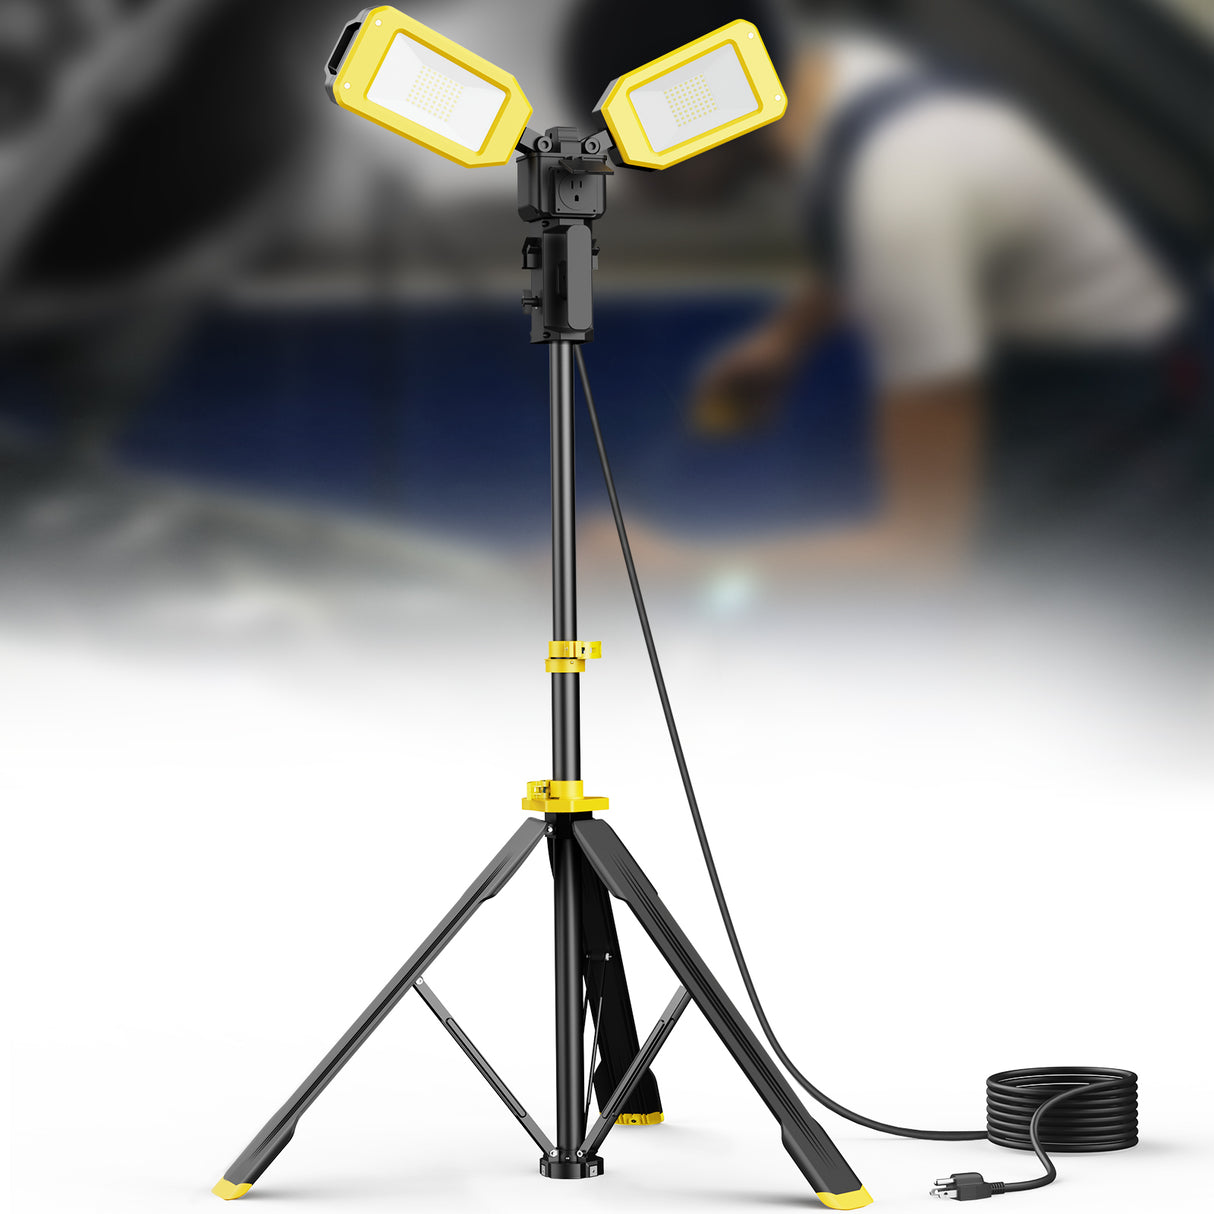 A dual-head portable work light with pantograph base and long cable is designed for plug and play.